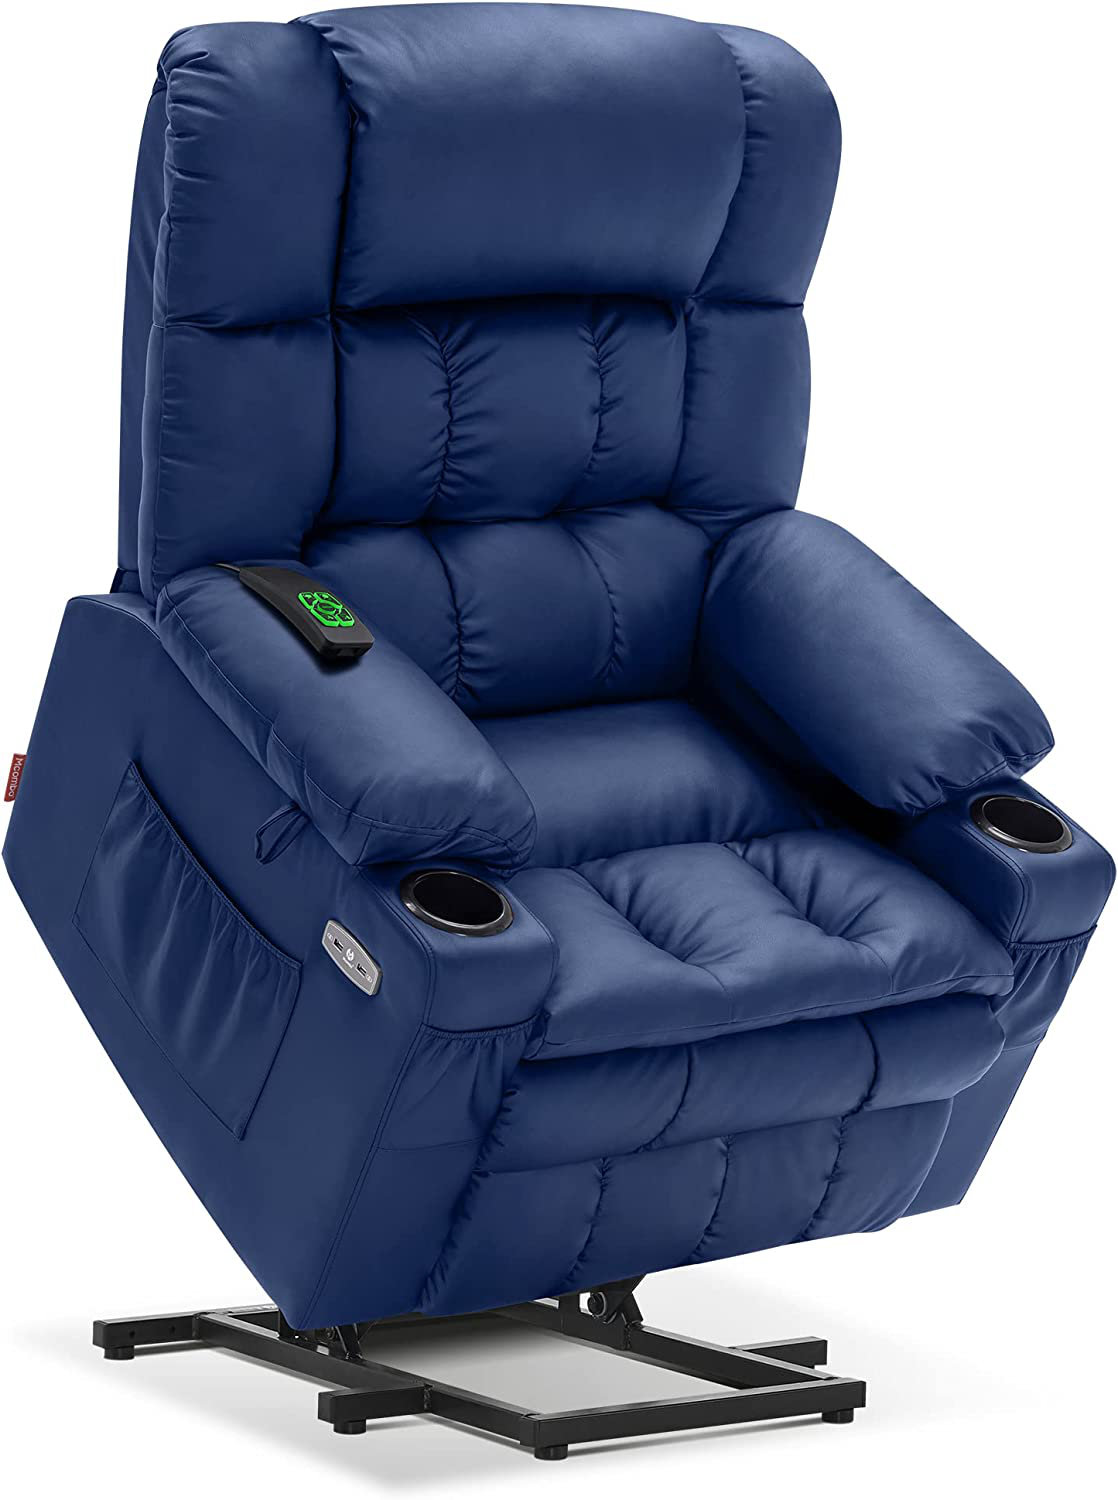 MCombo Large Power Lift Recliner with Extended Footrest for Big